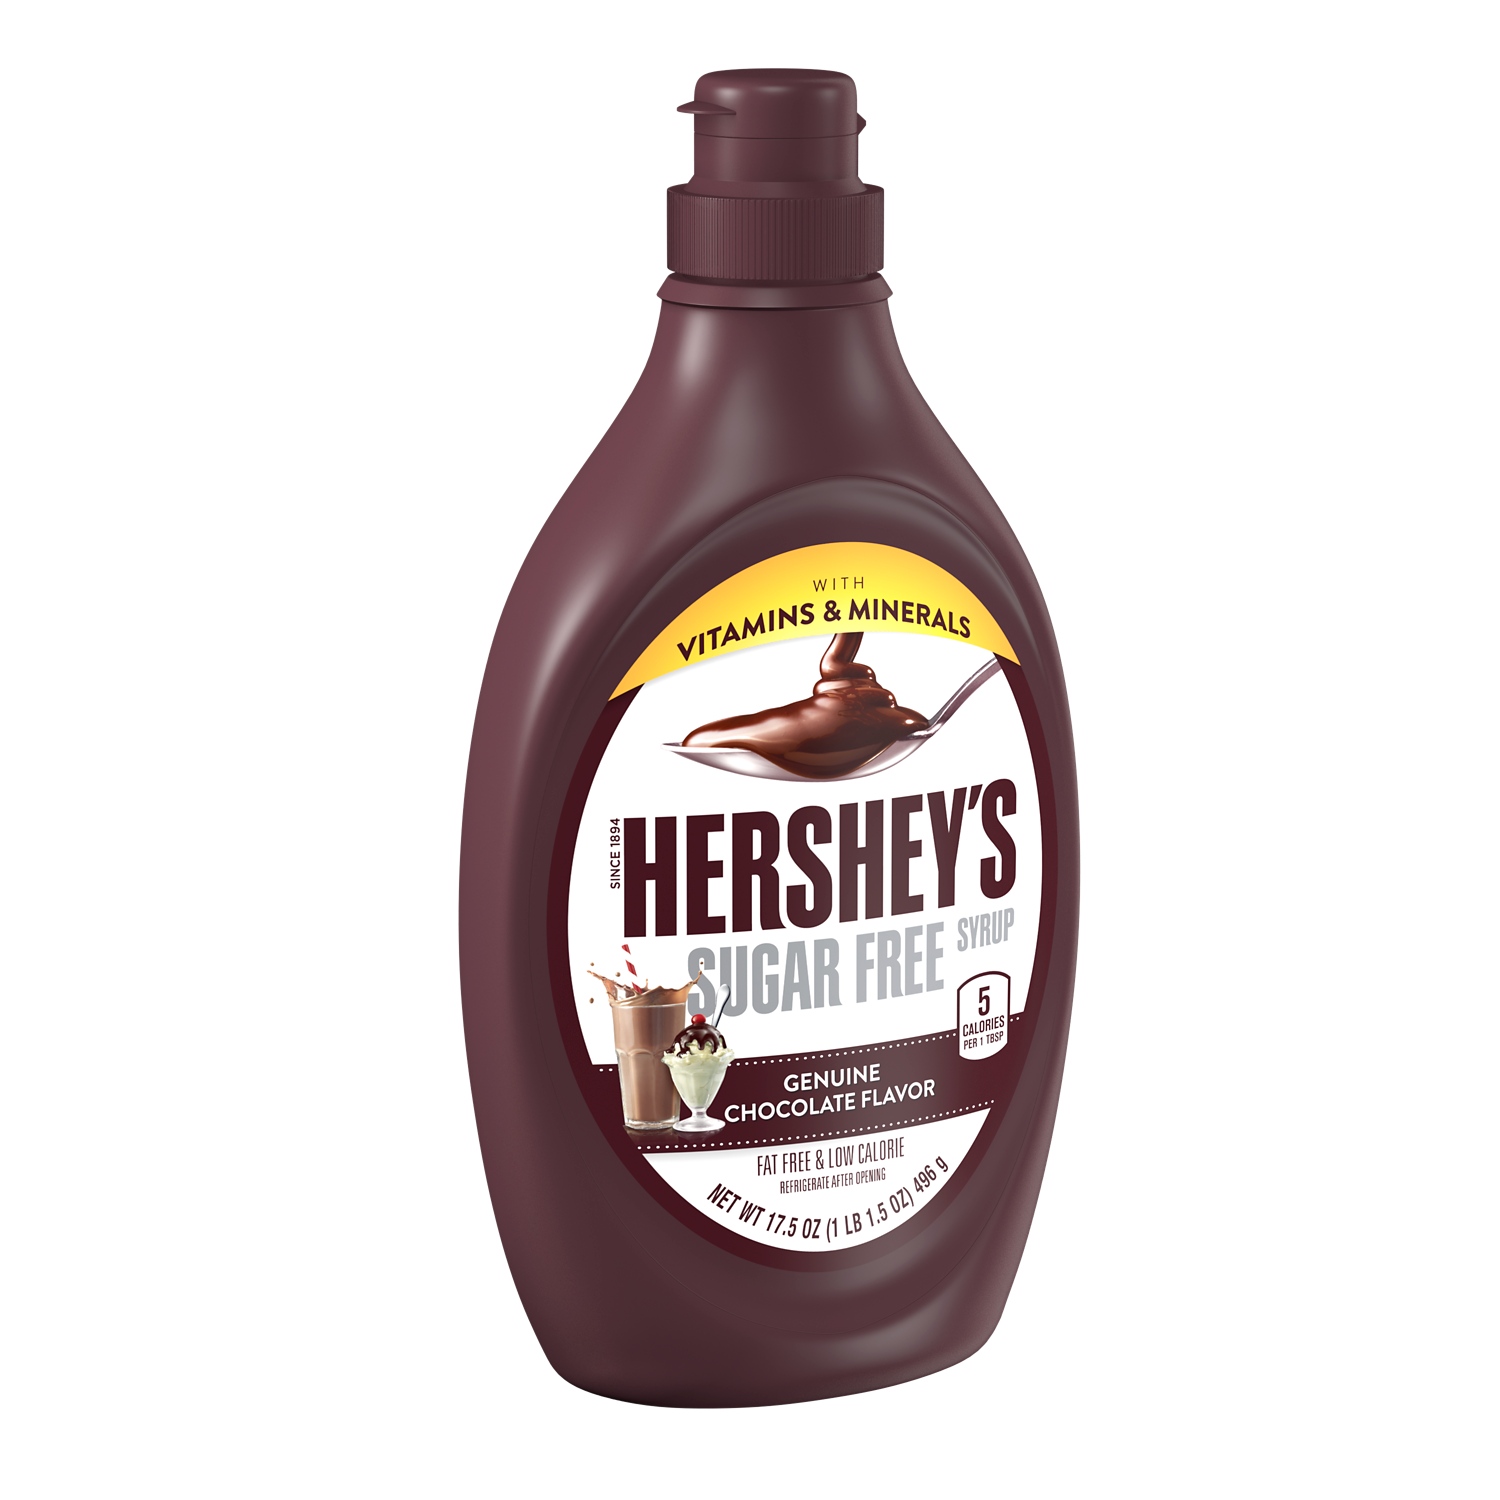 HERSHEY'S Sugar Free Chocolate Syrup, 17.5 oz bottle - Left Side of Package